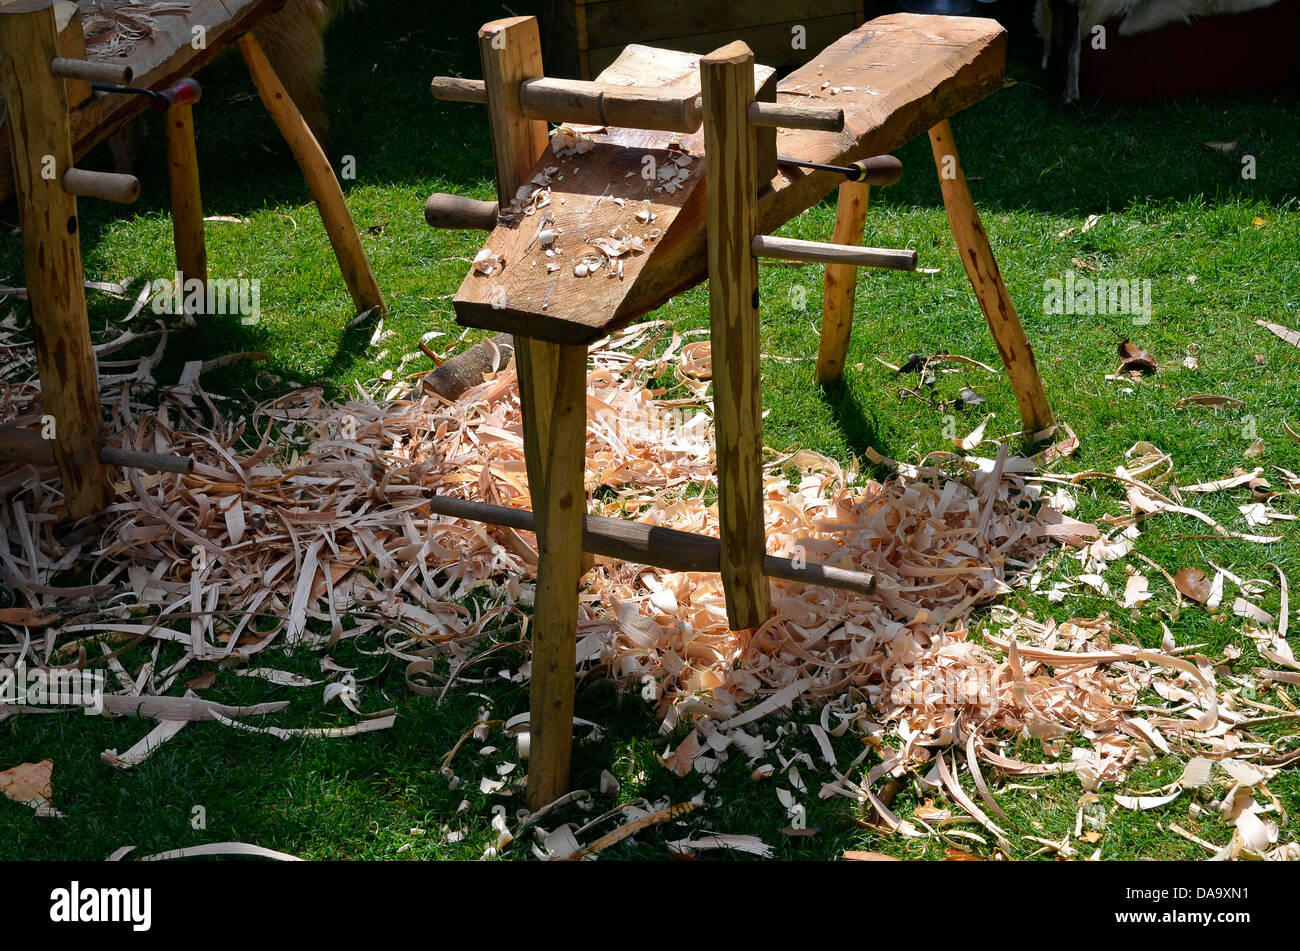 Woodsman or bodgers shave horse with shavings scattered on the ground - part of a demonstration at a country fair. Stock Photo